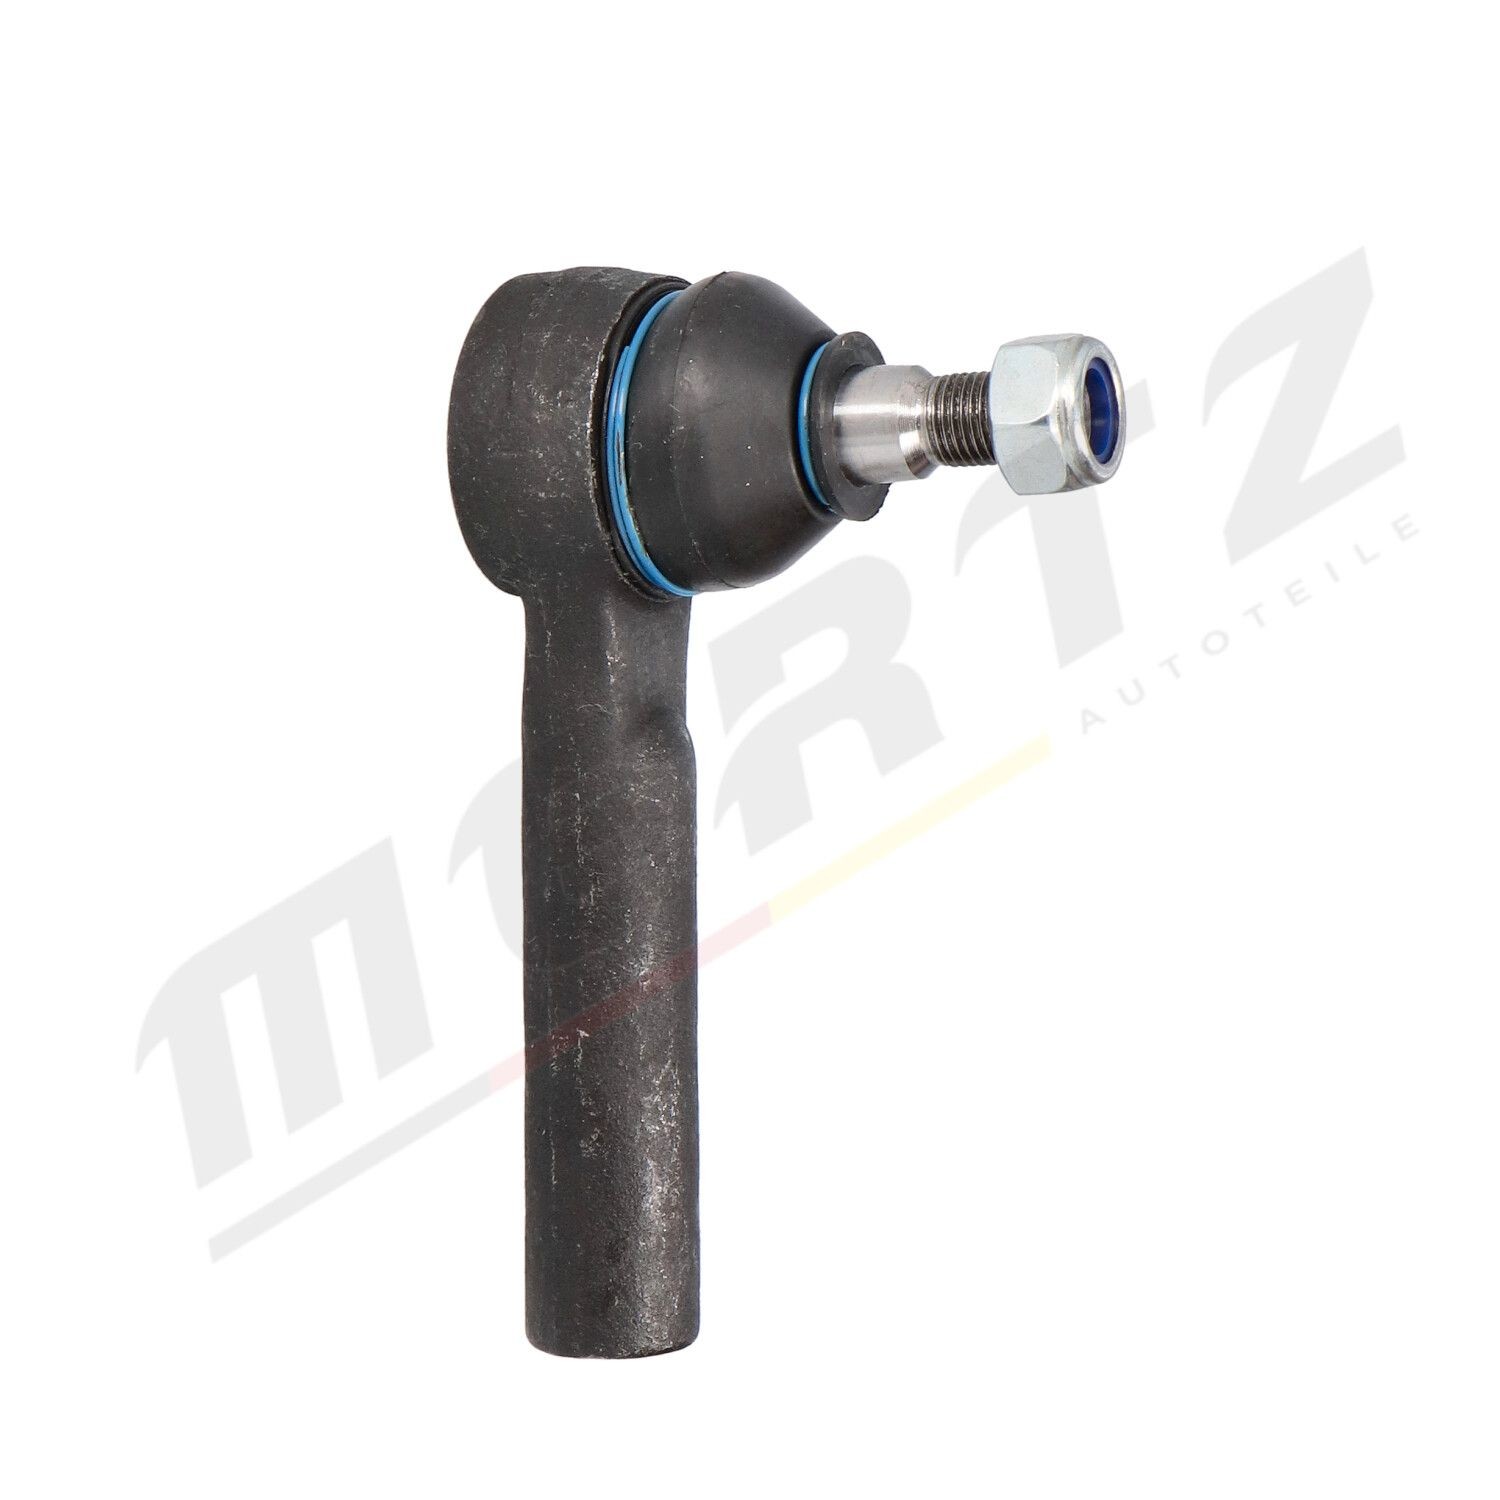 M-S0427 Tie rod end M-S0427 MERTZ M12x1,25 mm, Front Axle Left, Front Axle Right, with self-locking nut